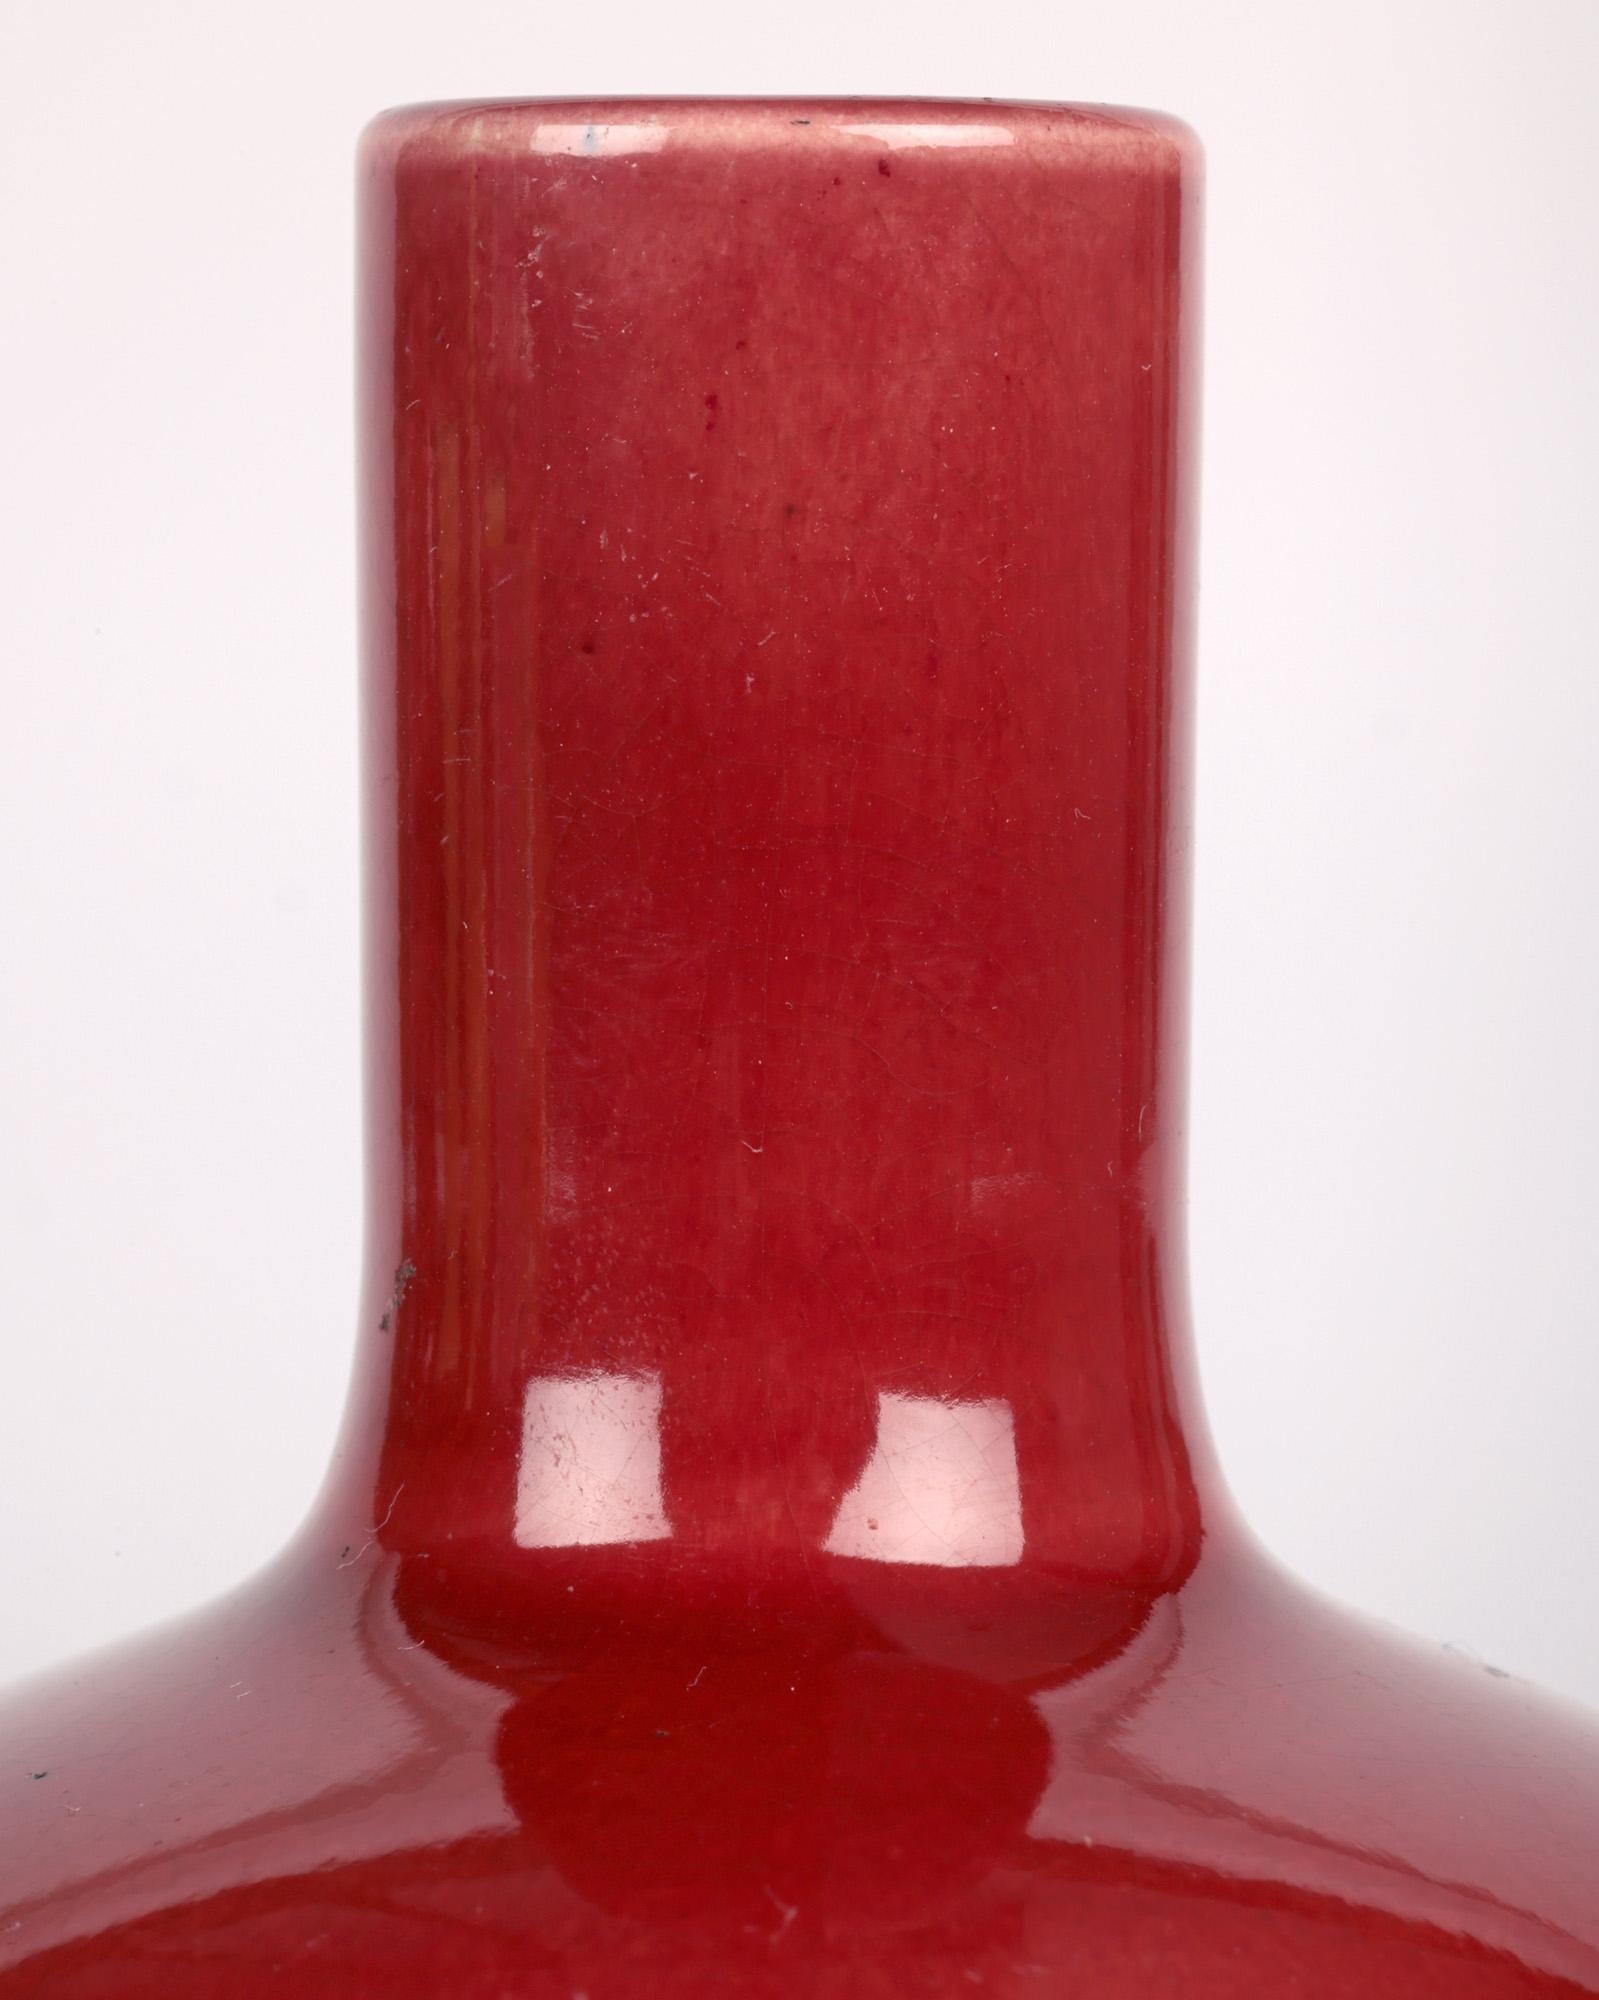 A stylish Arts & Crafts small bottle shaped vase, in the manner of Christopher Dresser, decorated in red Sand de Boeuf glazes by renowned potter James Wardle and dating from around 1890.

The vase is part of a private collection of Arts and Crafts